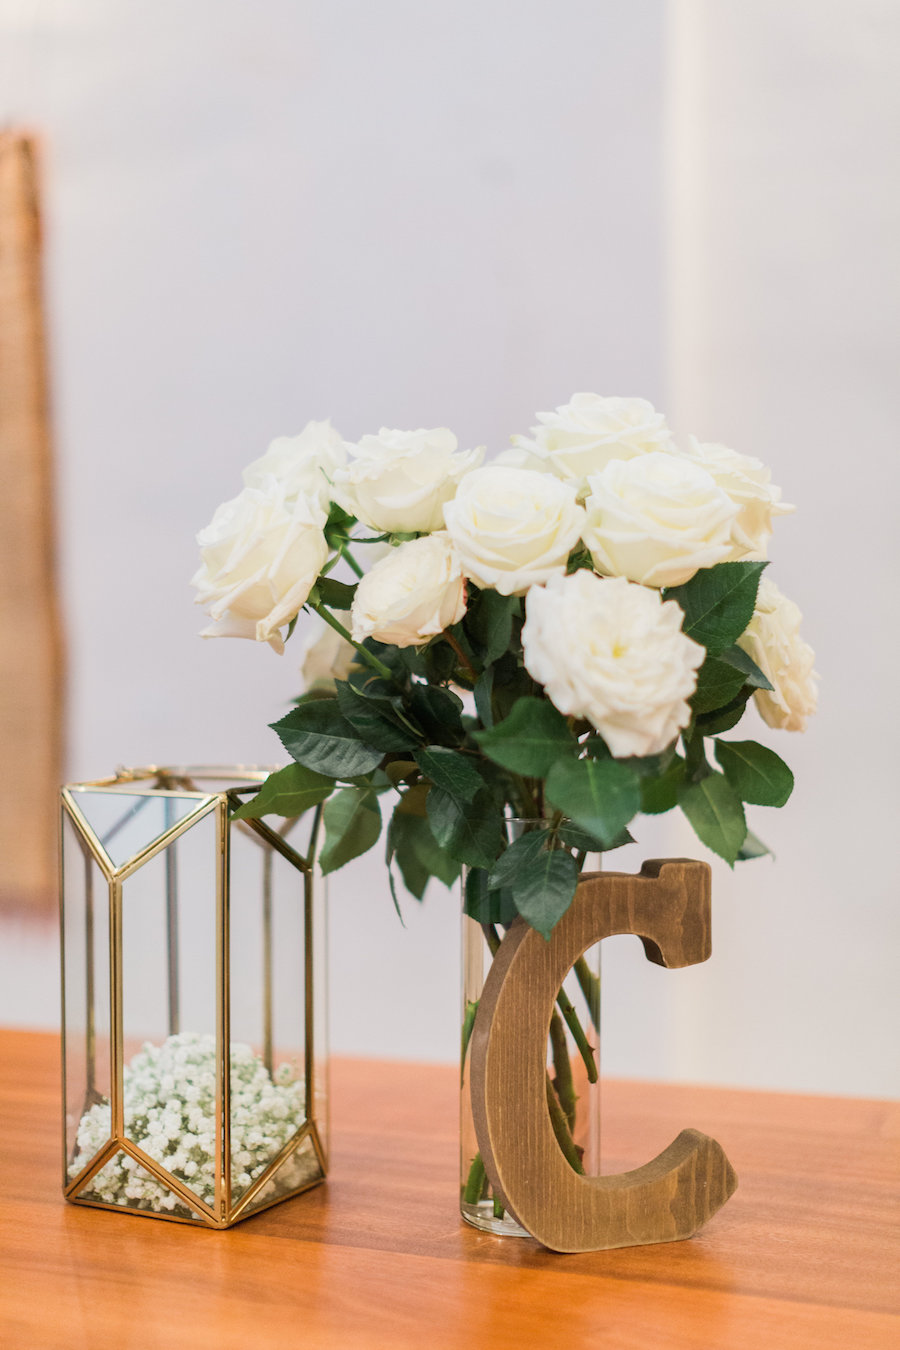 Rustic Wedding Reception Decor with Wooden Monogram Initial and Ivory Roses